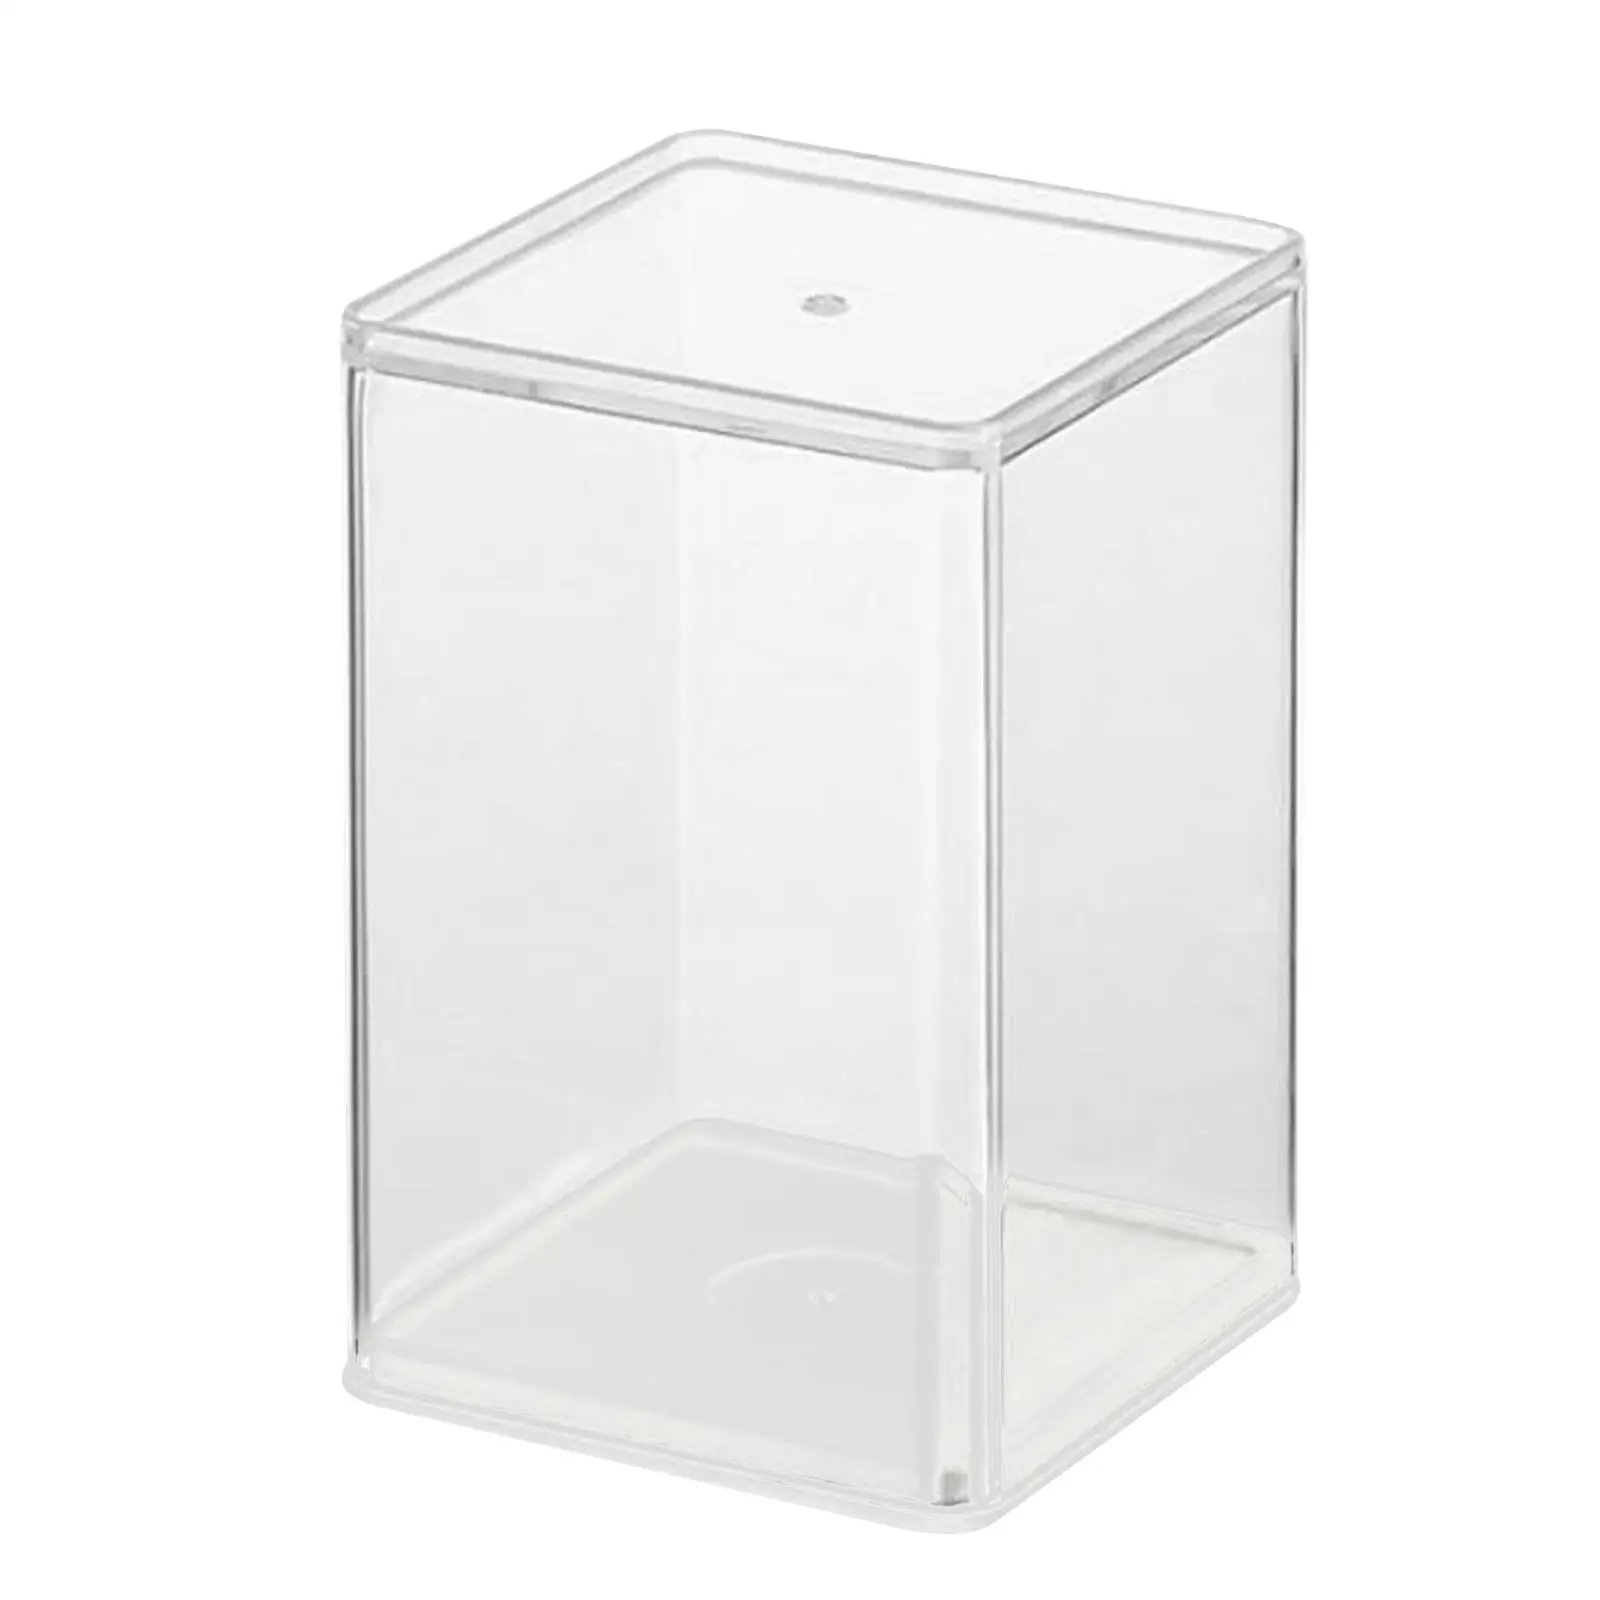 Clear Acrylic Display Rack Holder Dust Proof Free Standing Protection Assemble Countertop Box Dust Cabinet for Toys Model Dolls